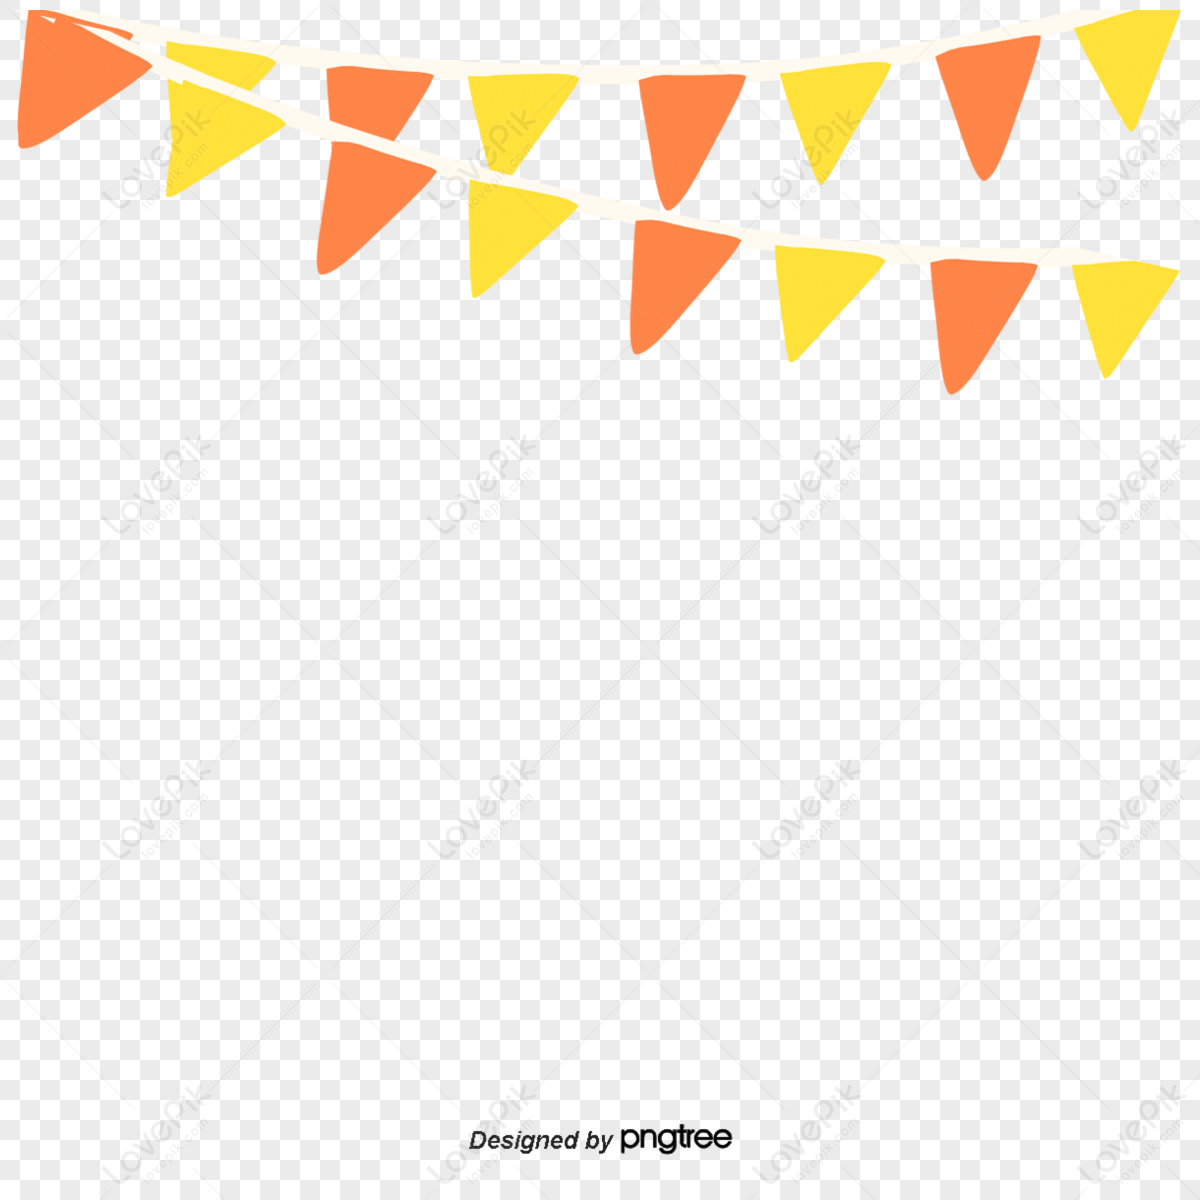 Decorative Flags Promoted by Festival Activities,brown,promotional activity png image